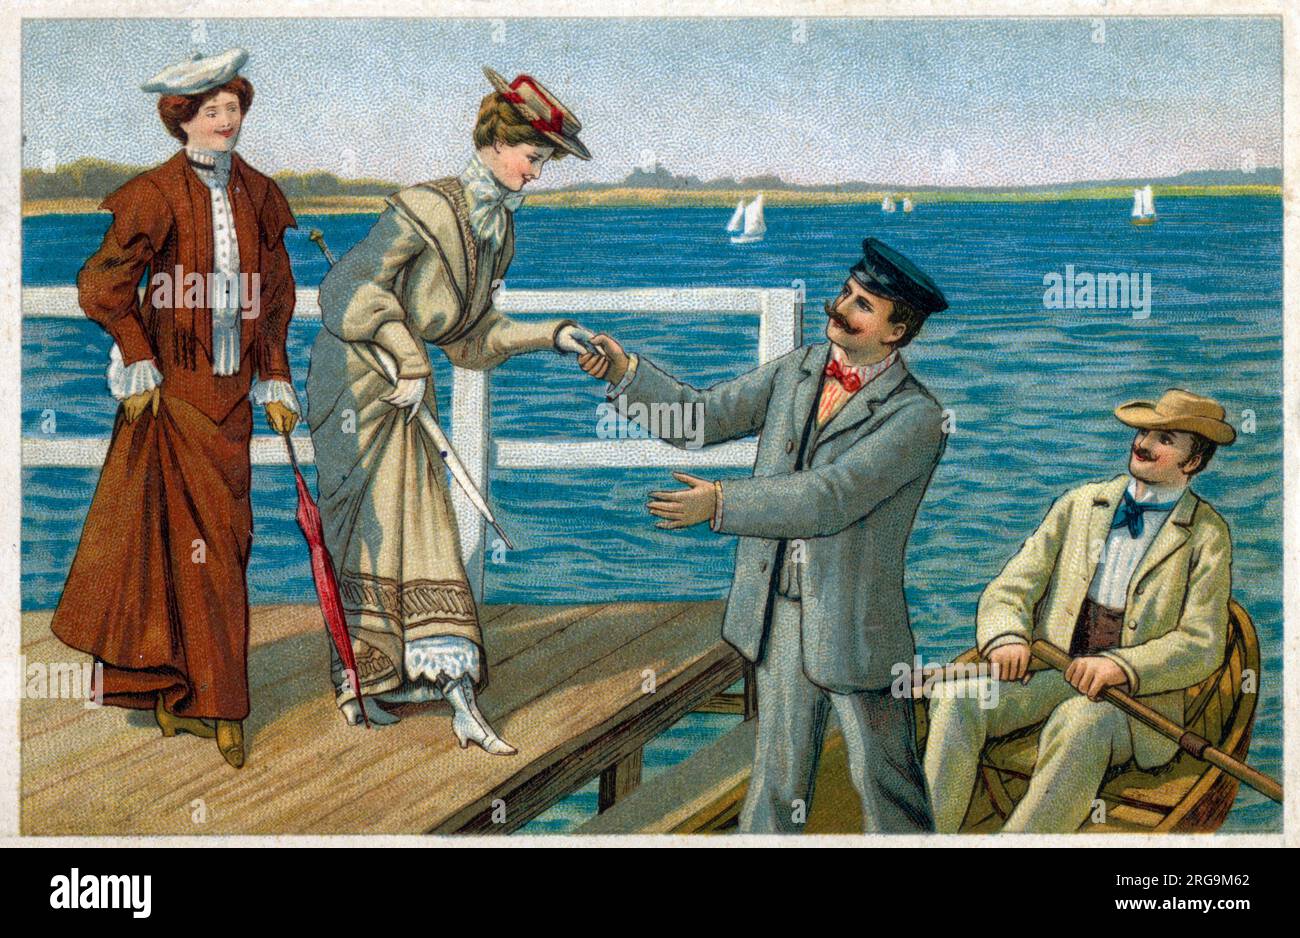 Chivalry - A Gentleman assists a lady in boarding a small rowing boat - 1900s America. Stock Photo